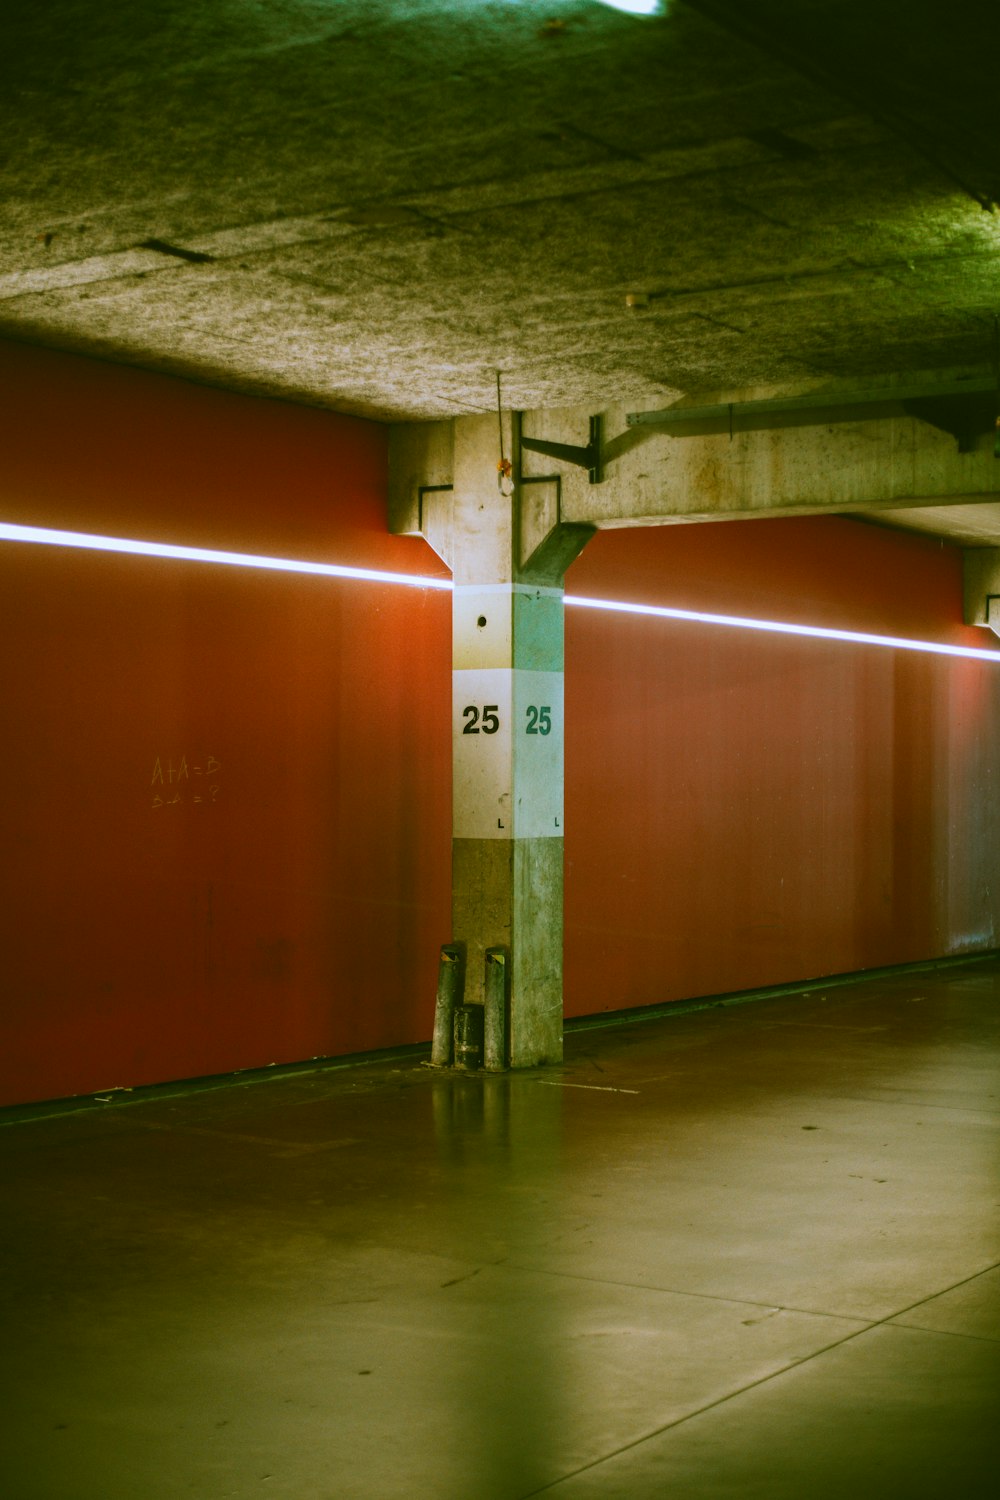 a parking garage with red walls and a clock